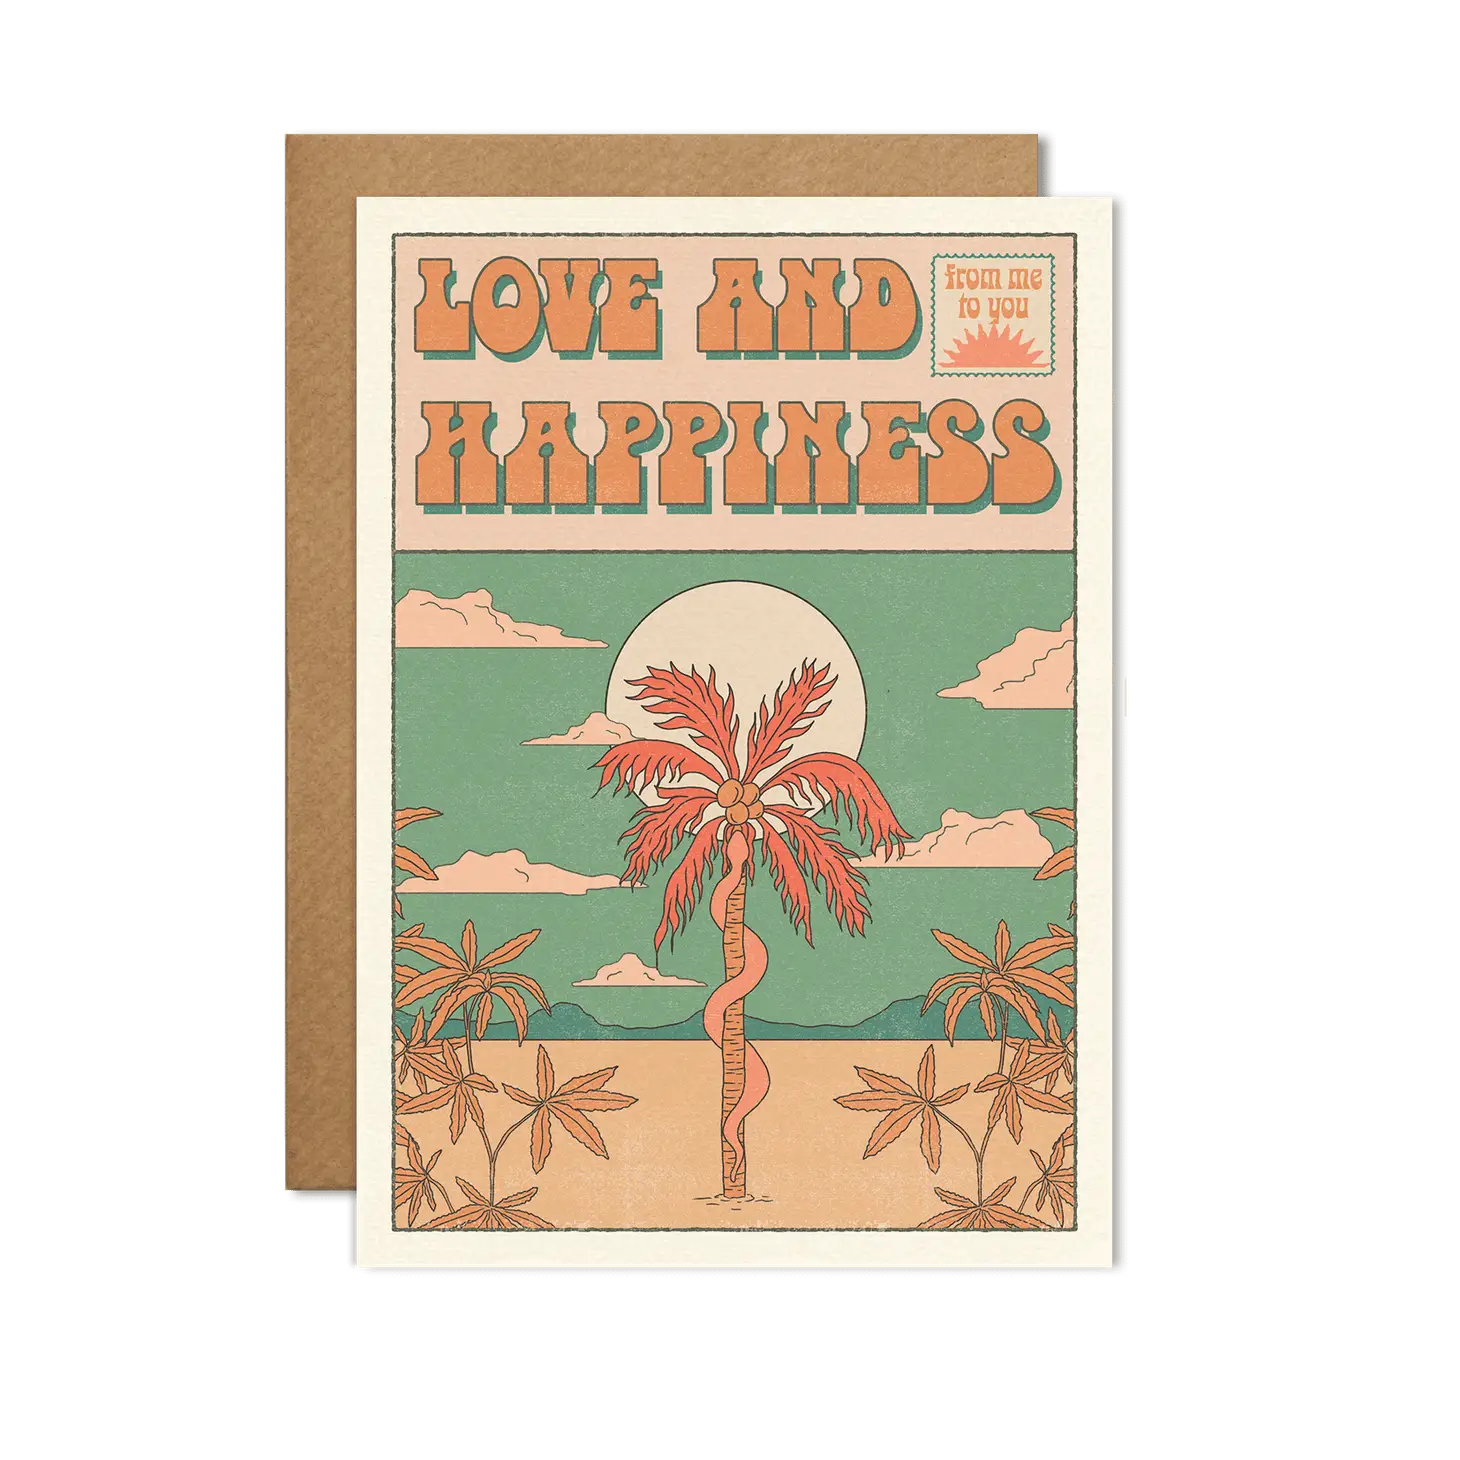 The Love And Happiness Greeting Card